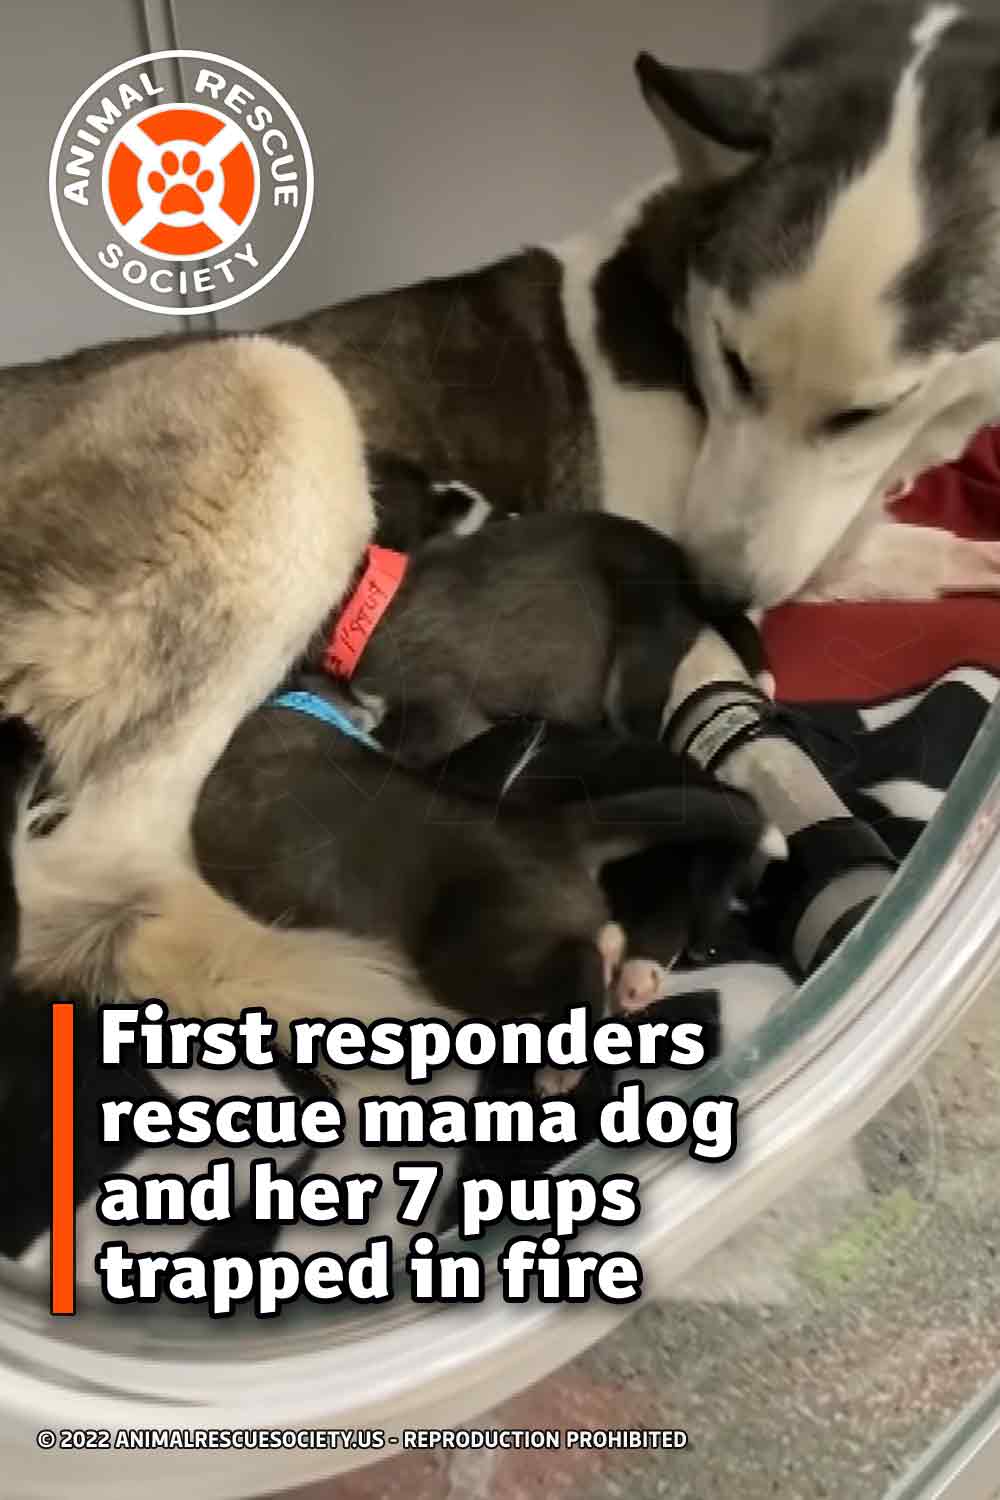 First responders rescue mama dog and her 7 pups trapped in fire